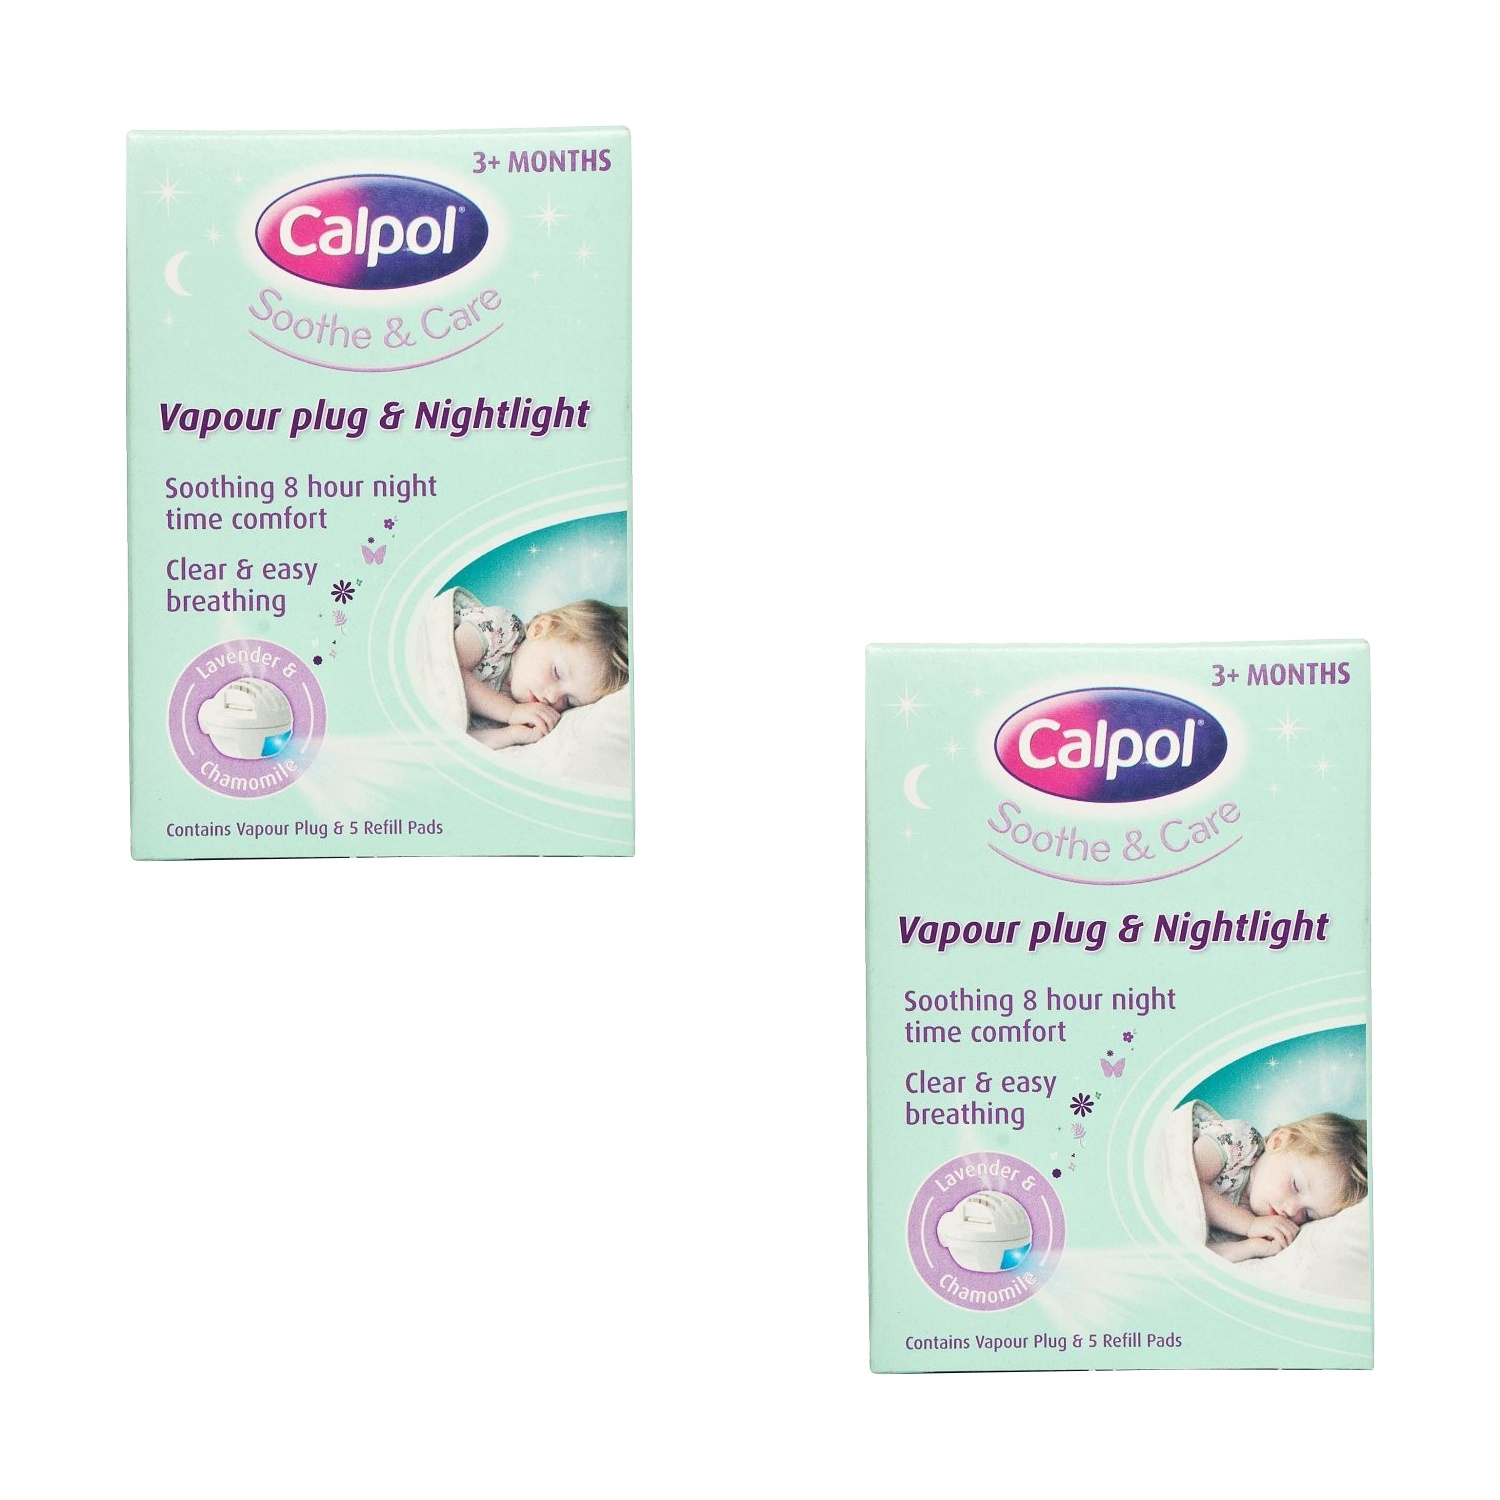 Calpol Sooth & Care Vapourhtlight- Twin Pack Review